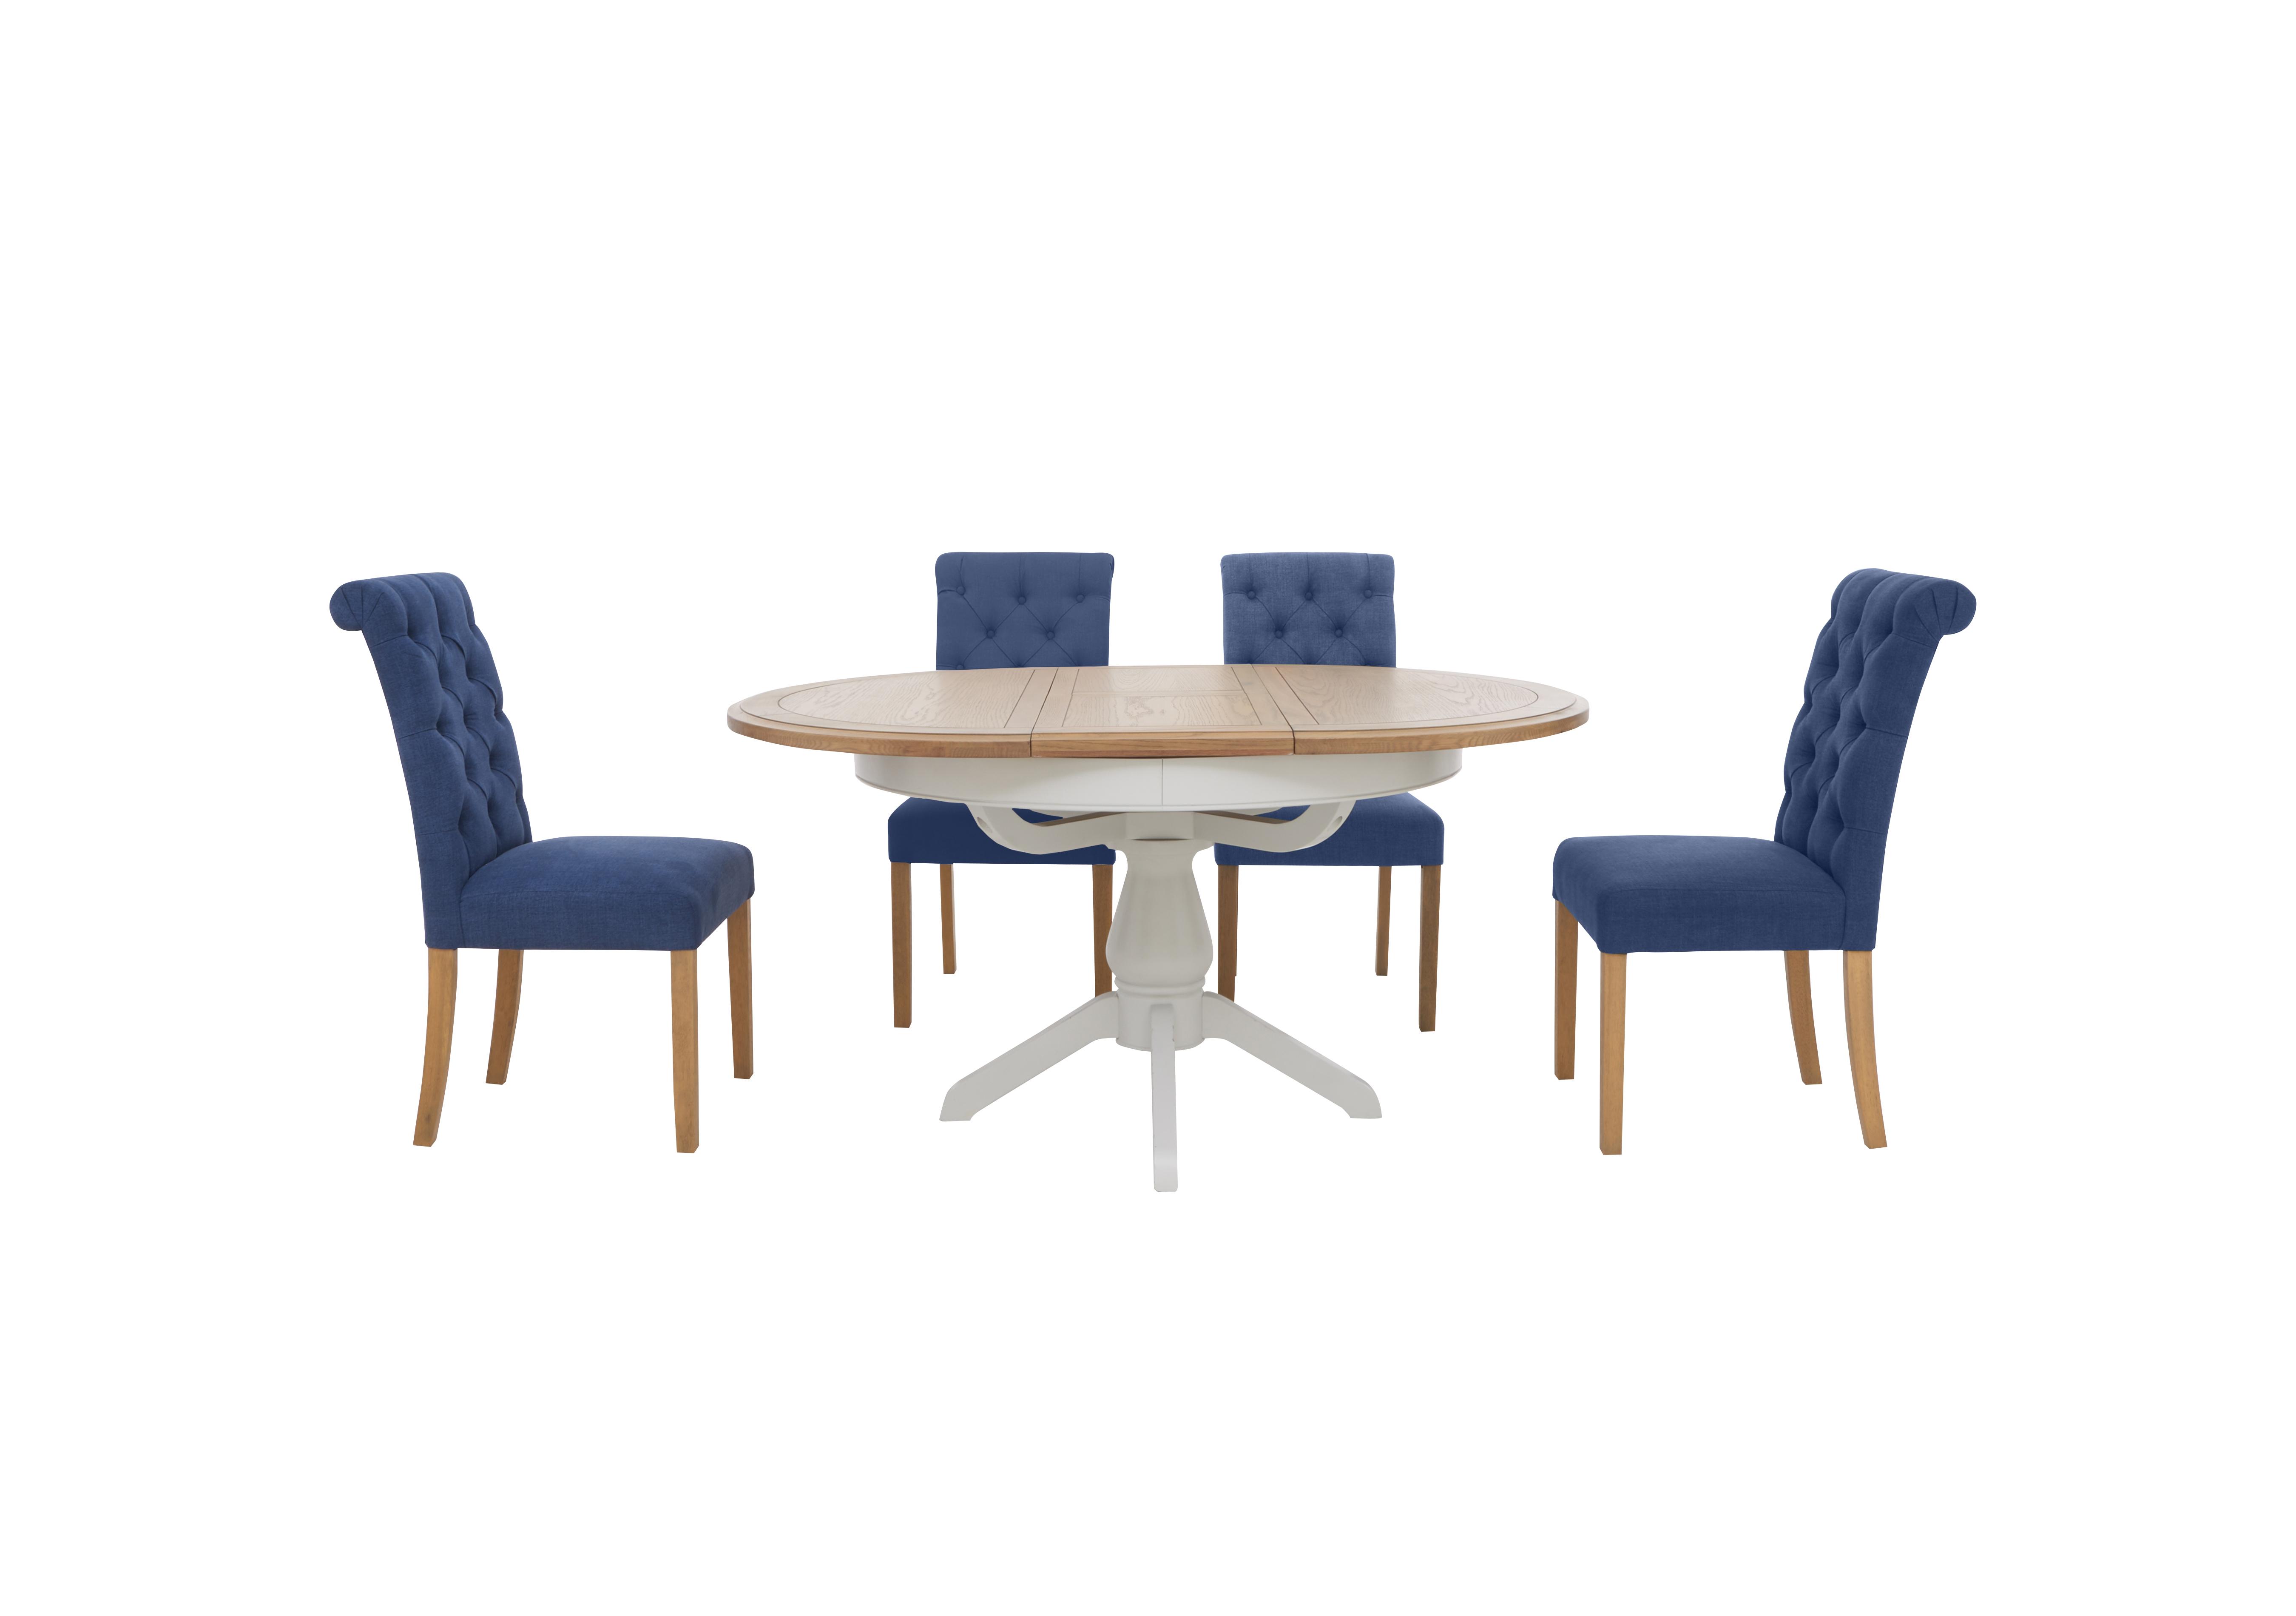 Hamilton Round Extending Dining Table and 4 Button Back Dining Chairs in Denim on Furniture Village